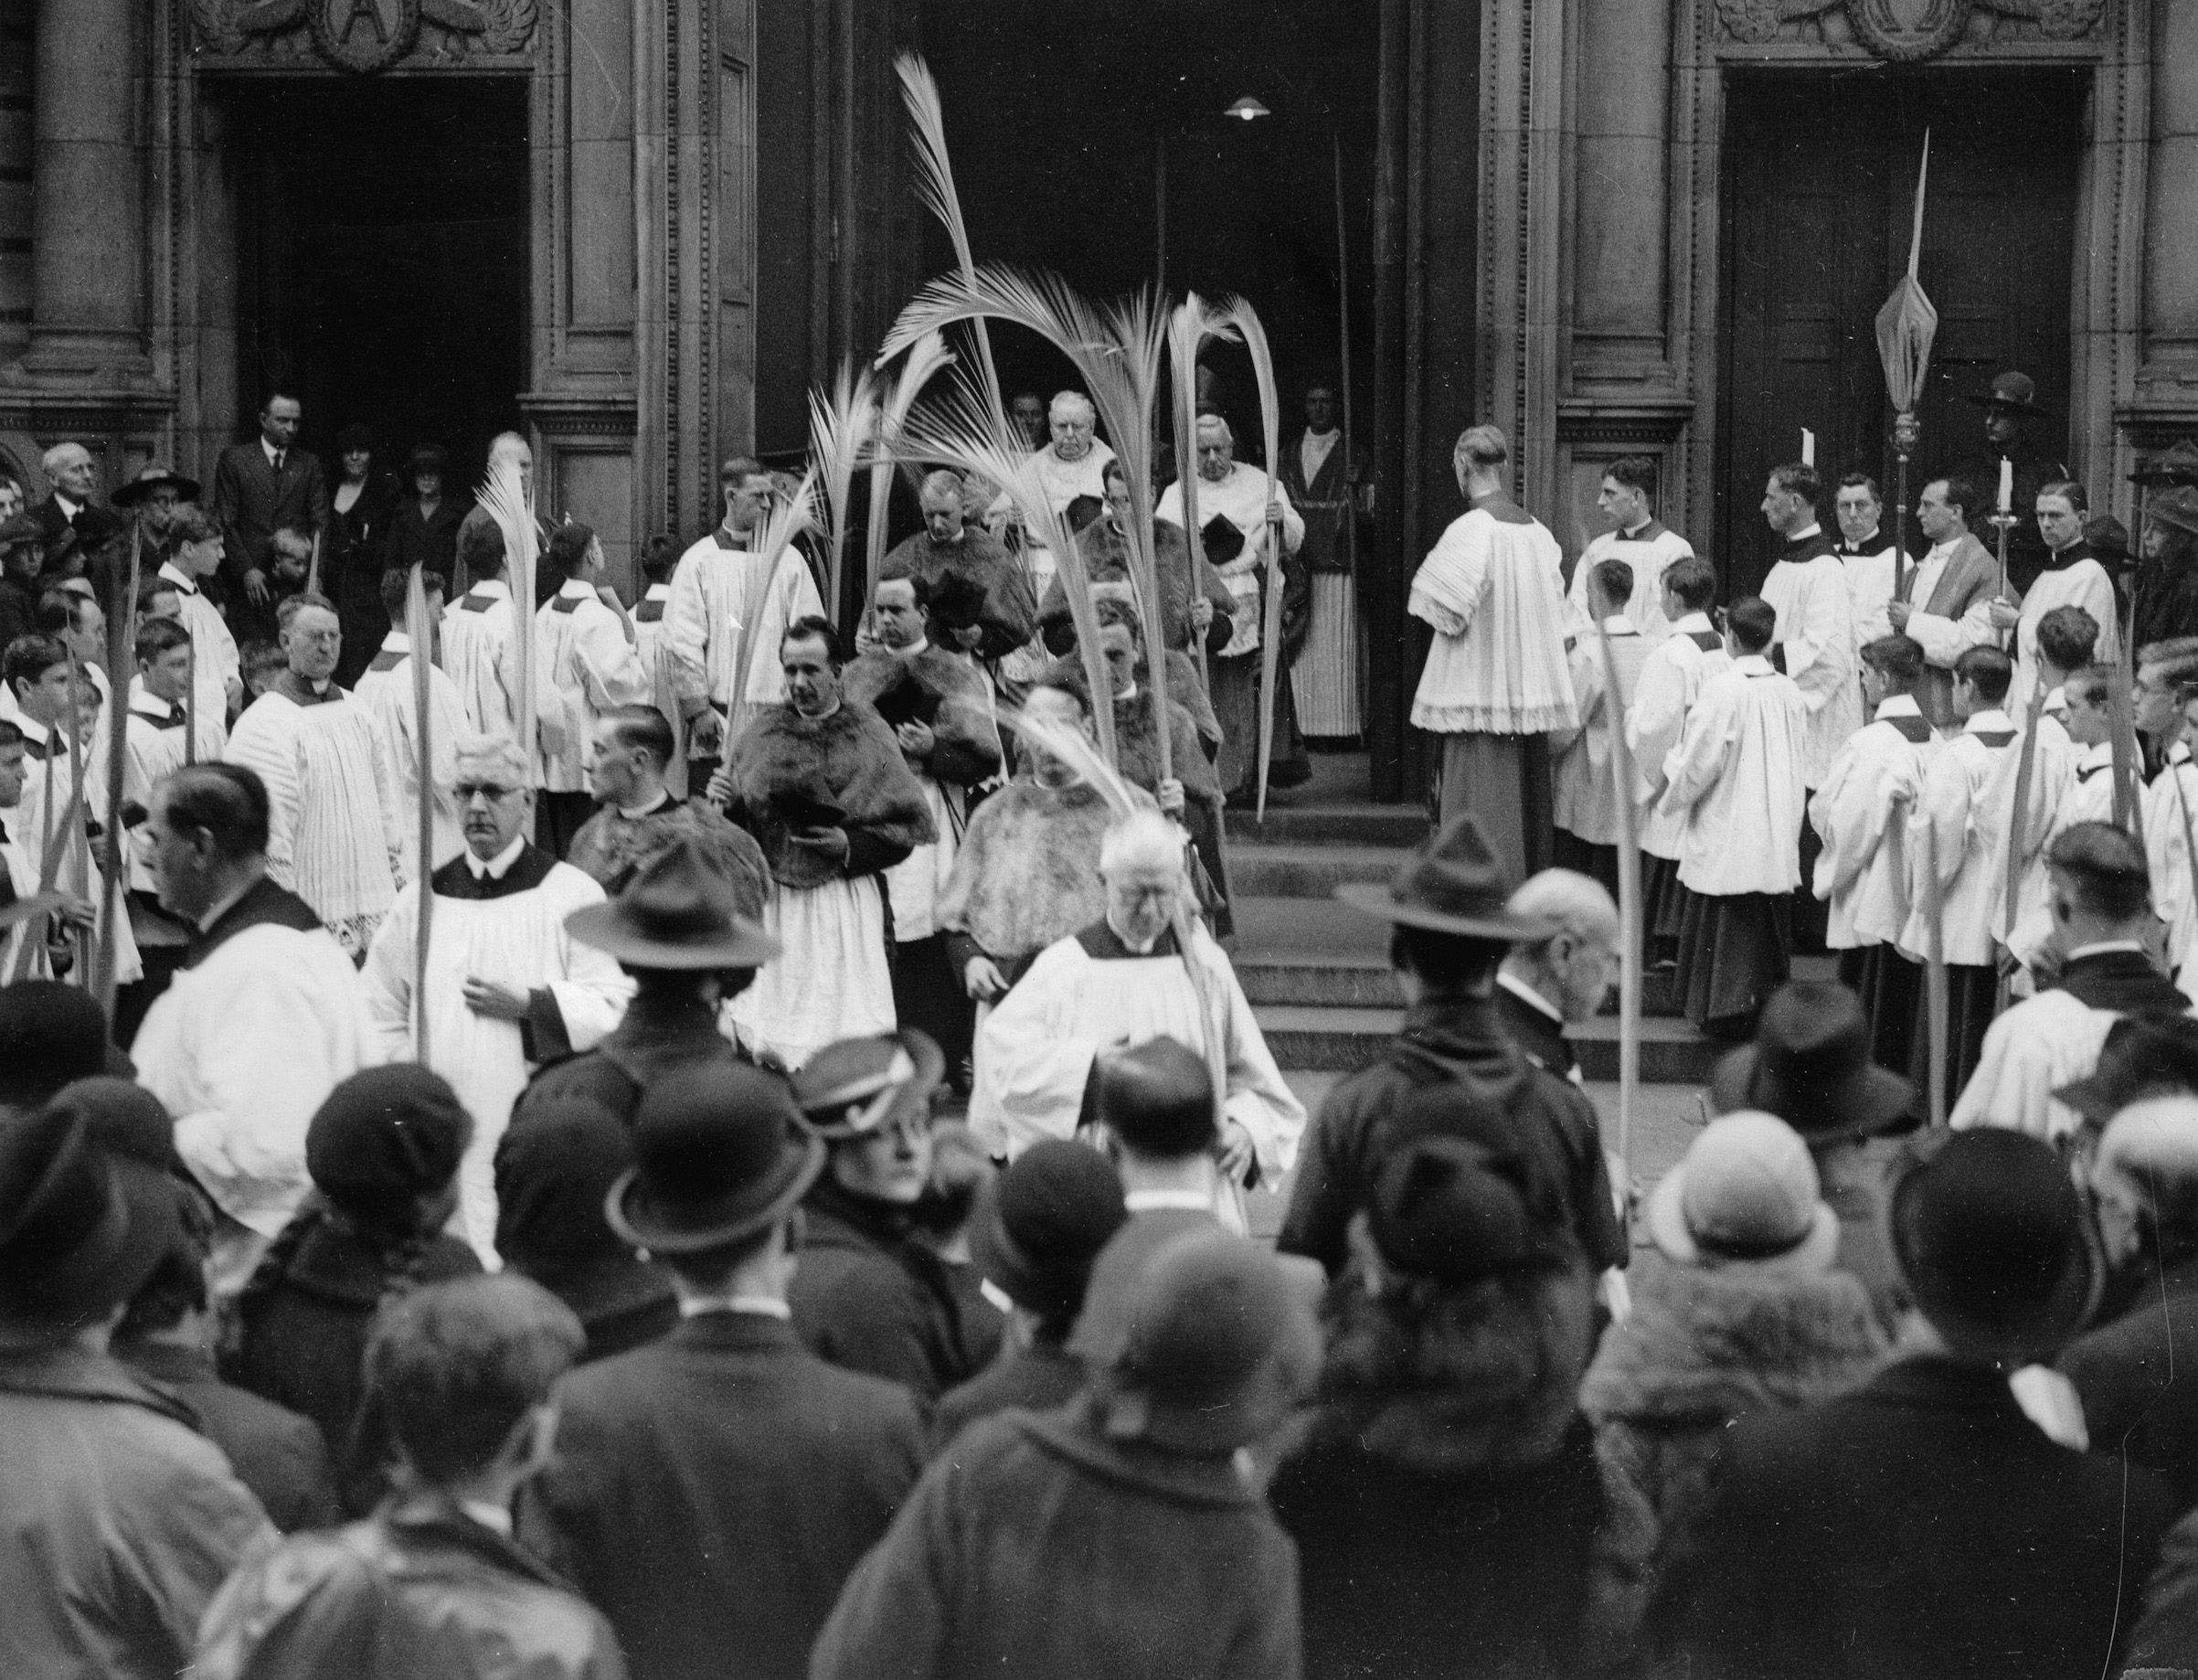 Procession on Palm Sunday in England, ca. 1930. (ImagnoGetty Images)